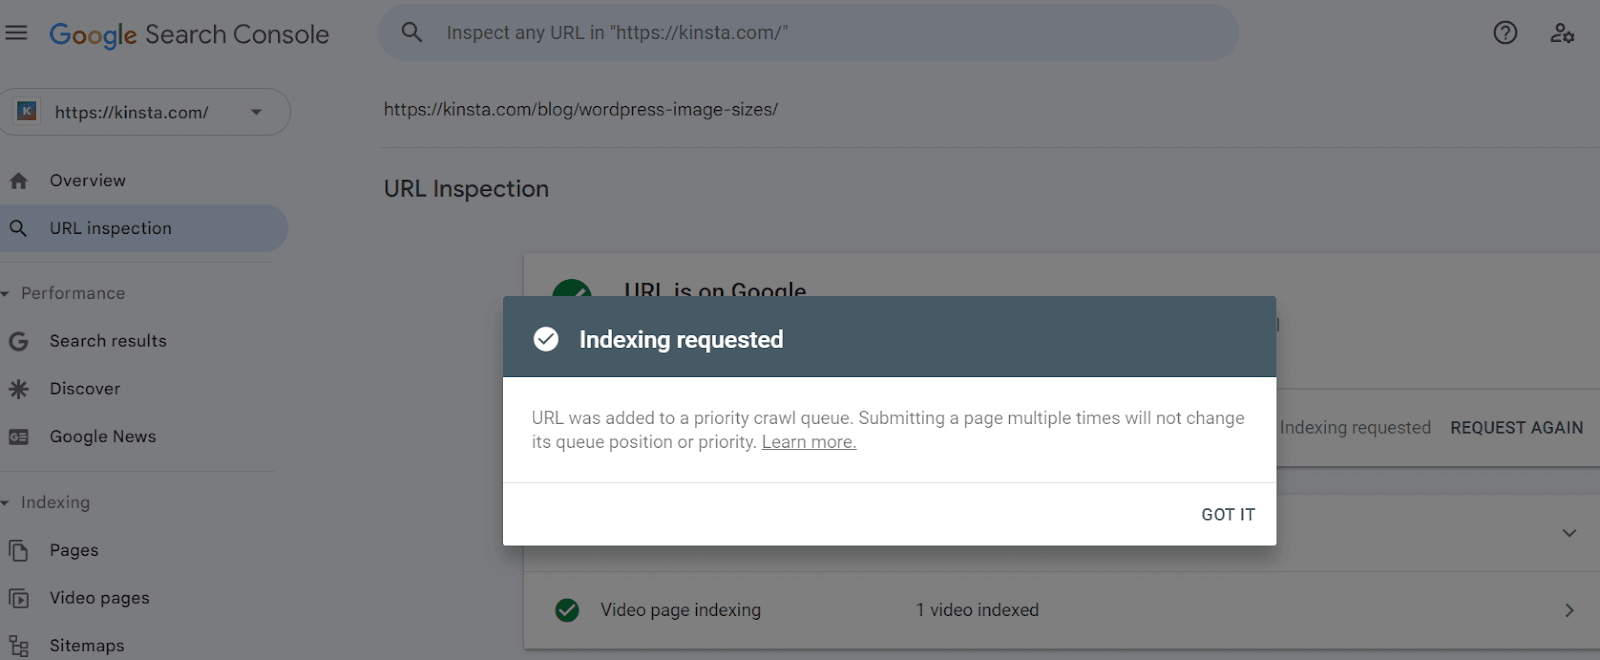 Indexing request confirmation message.